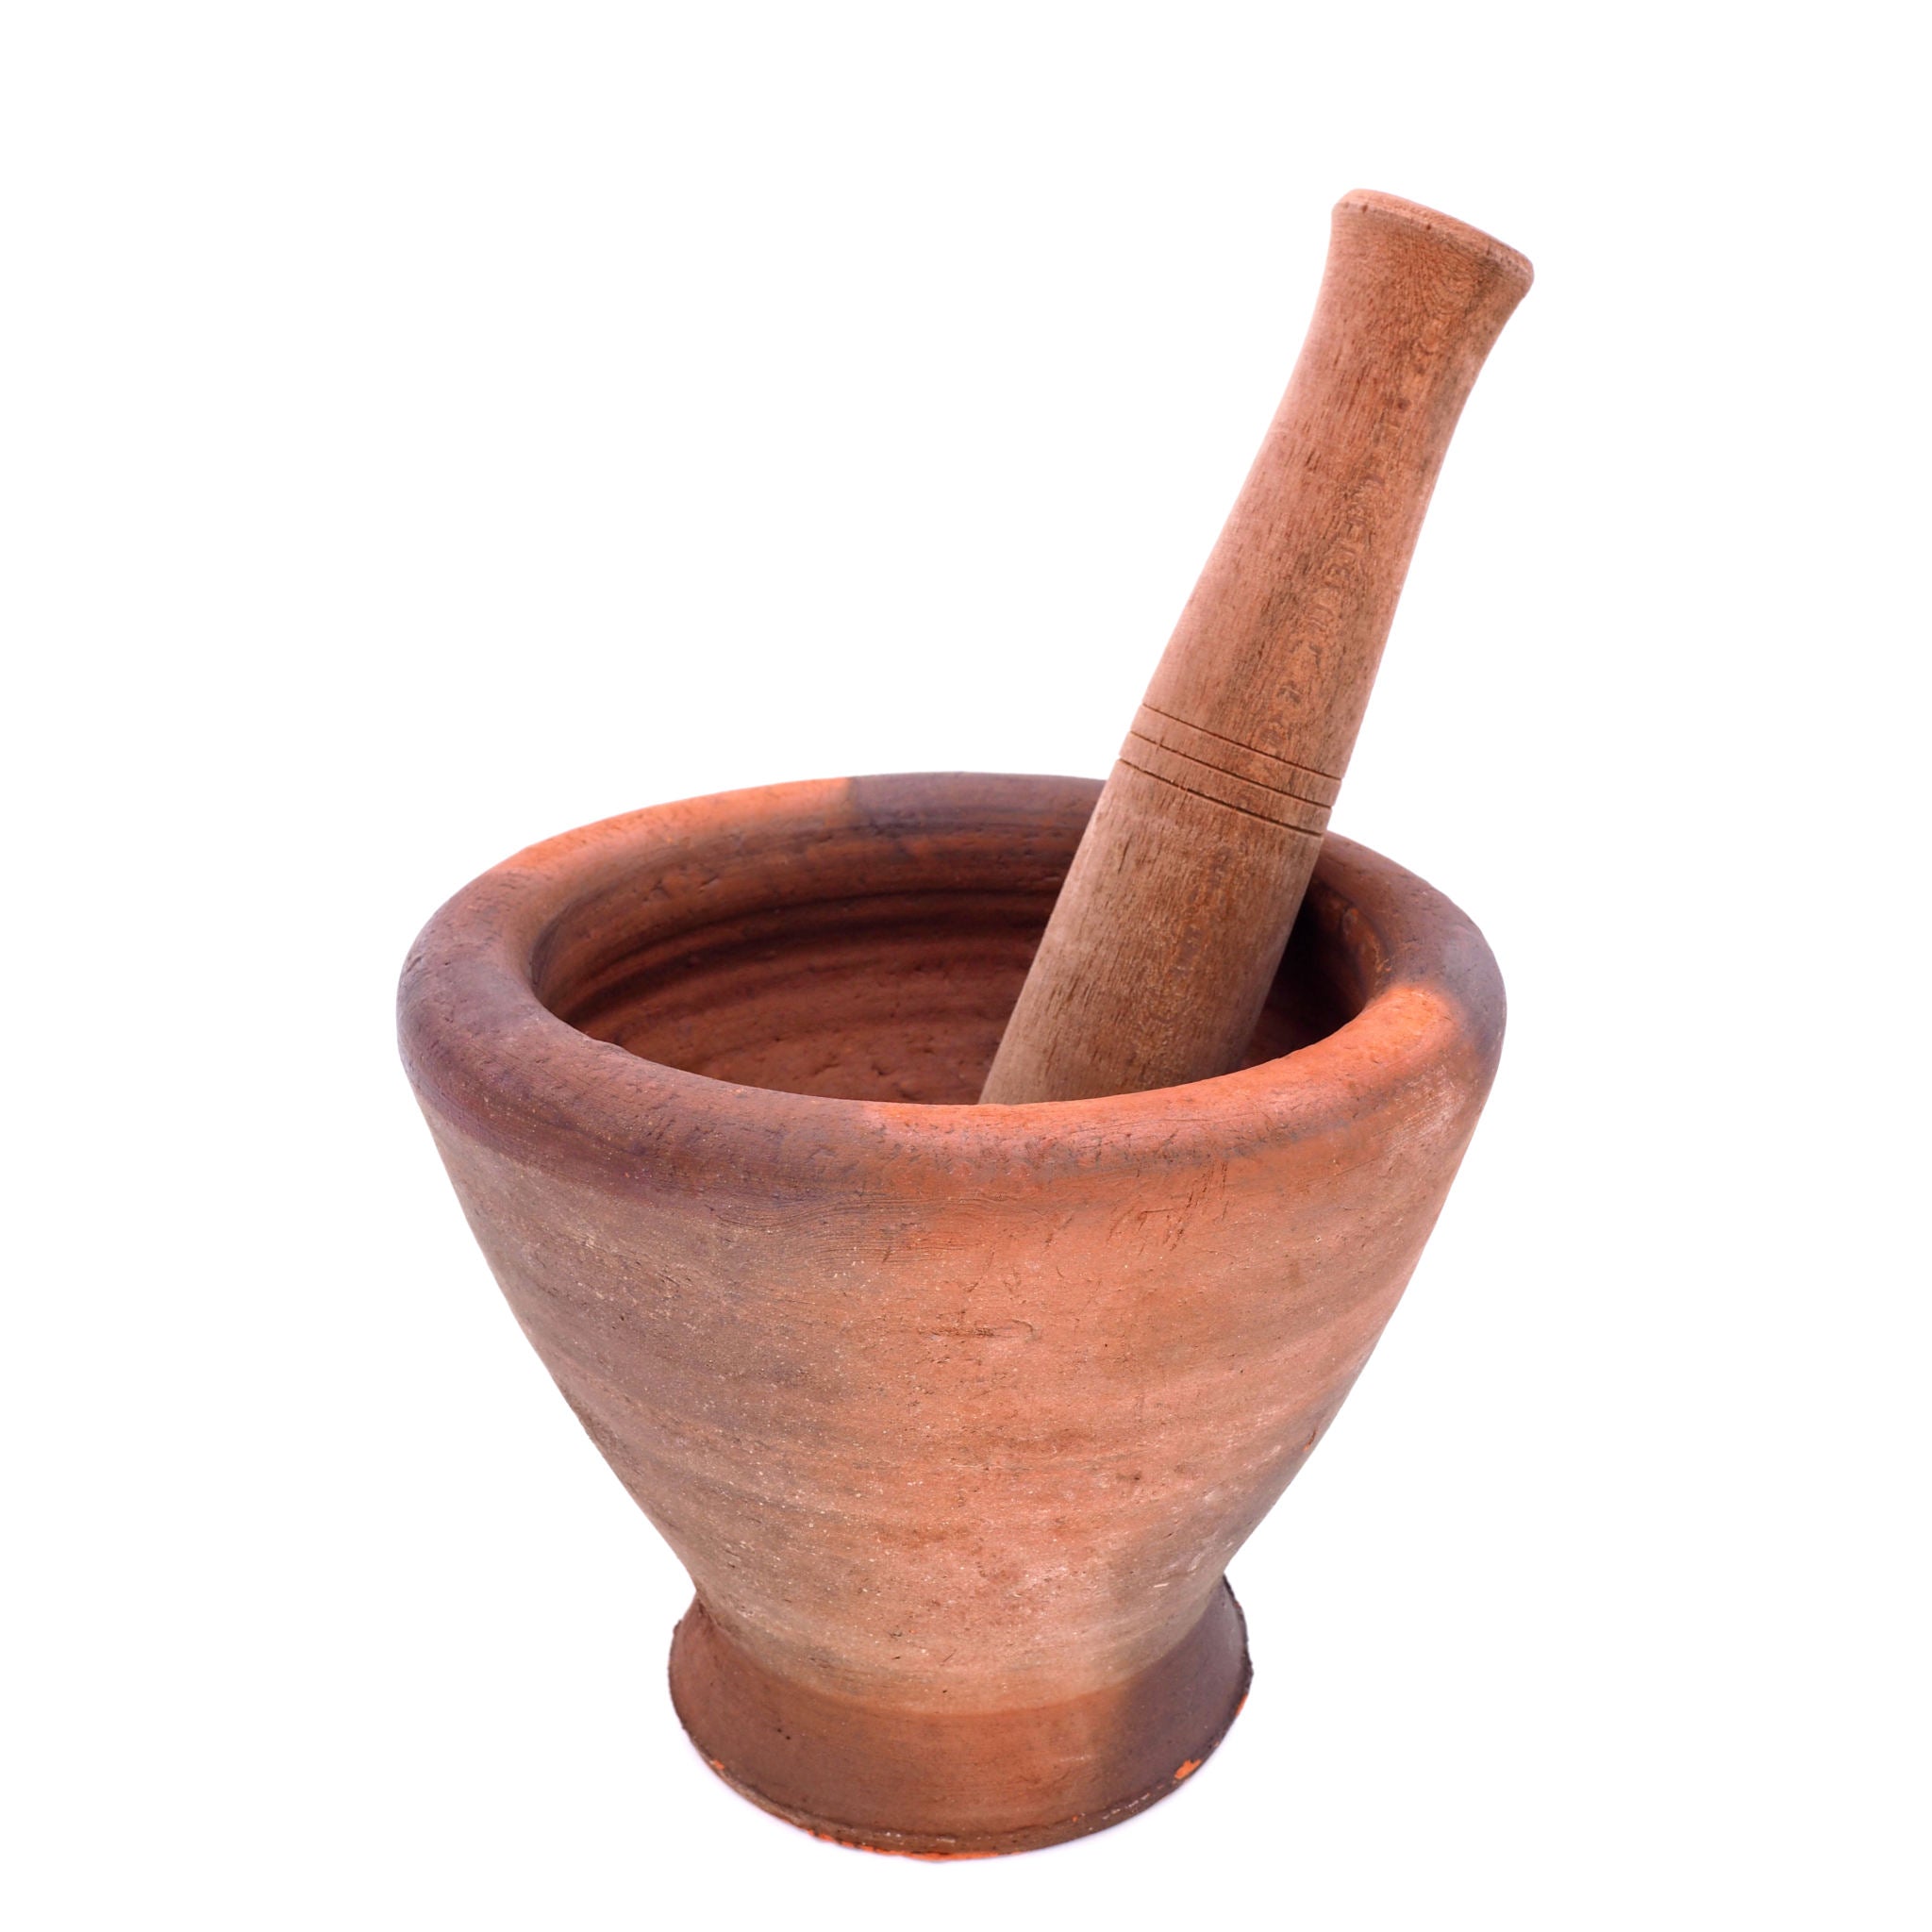 Thai pestle and mortar (Laos style) 23cm (9 inch)